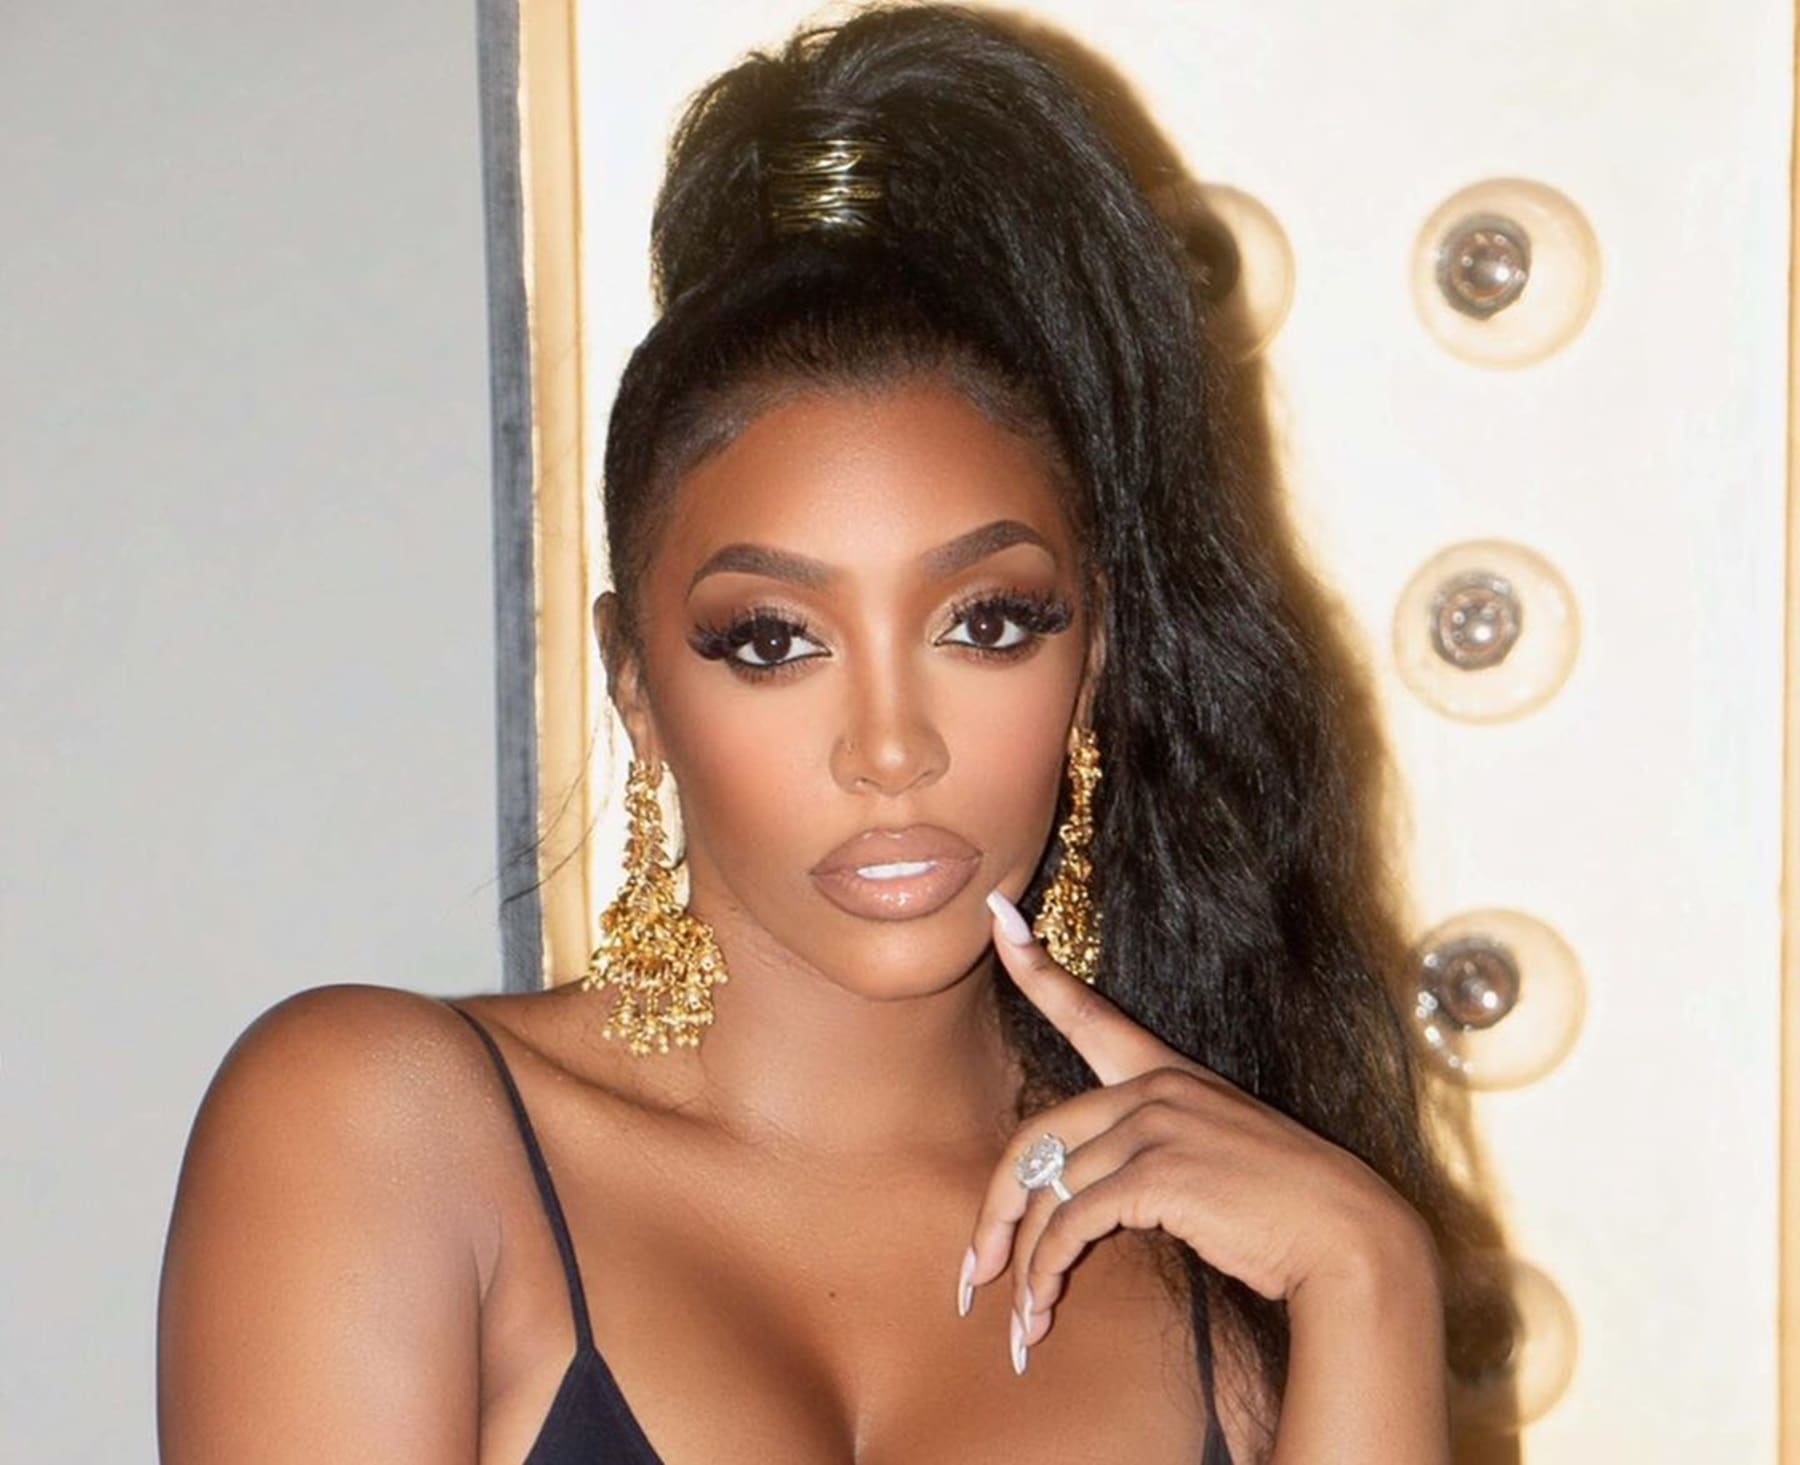 Porsha Williams And Tanya Sam Break The Internet With These Juicy Pics And Videos In Which They're Shaking Their Curvy Bodies On A Boat During Their Vacay